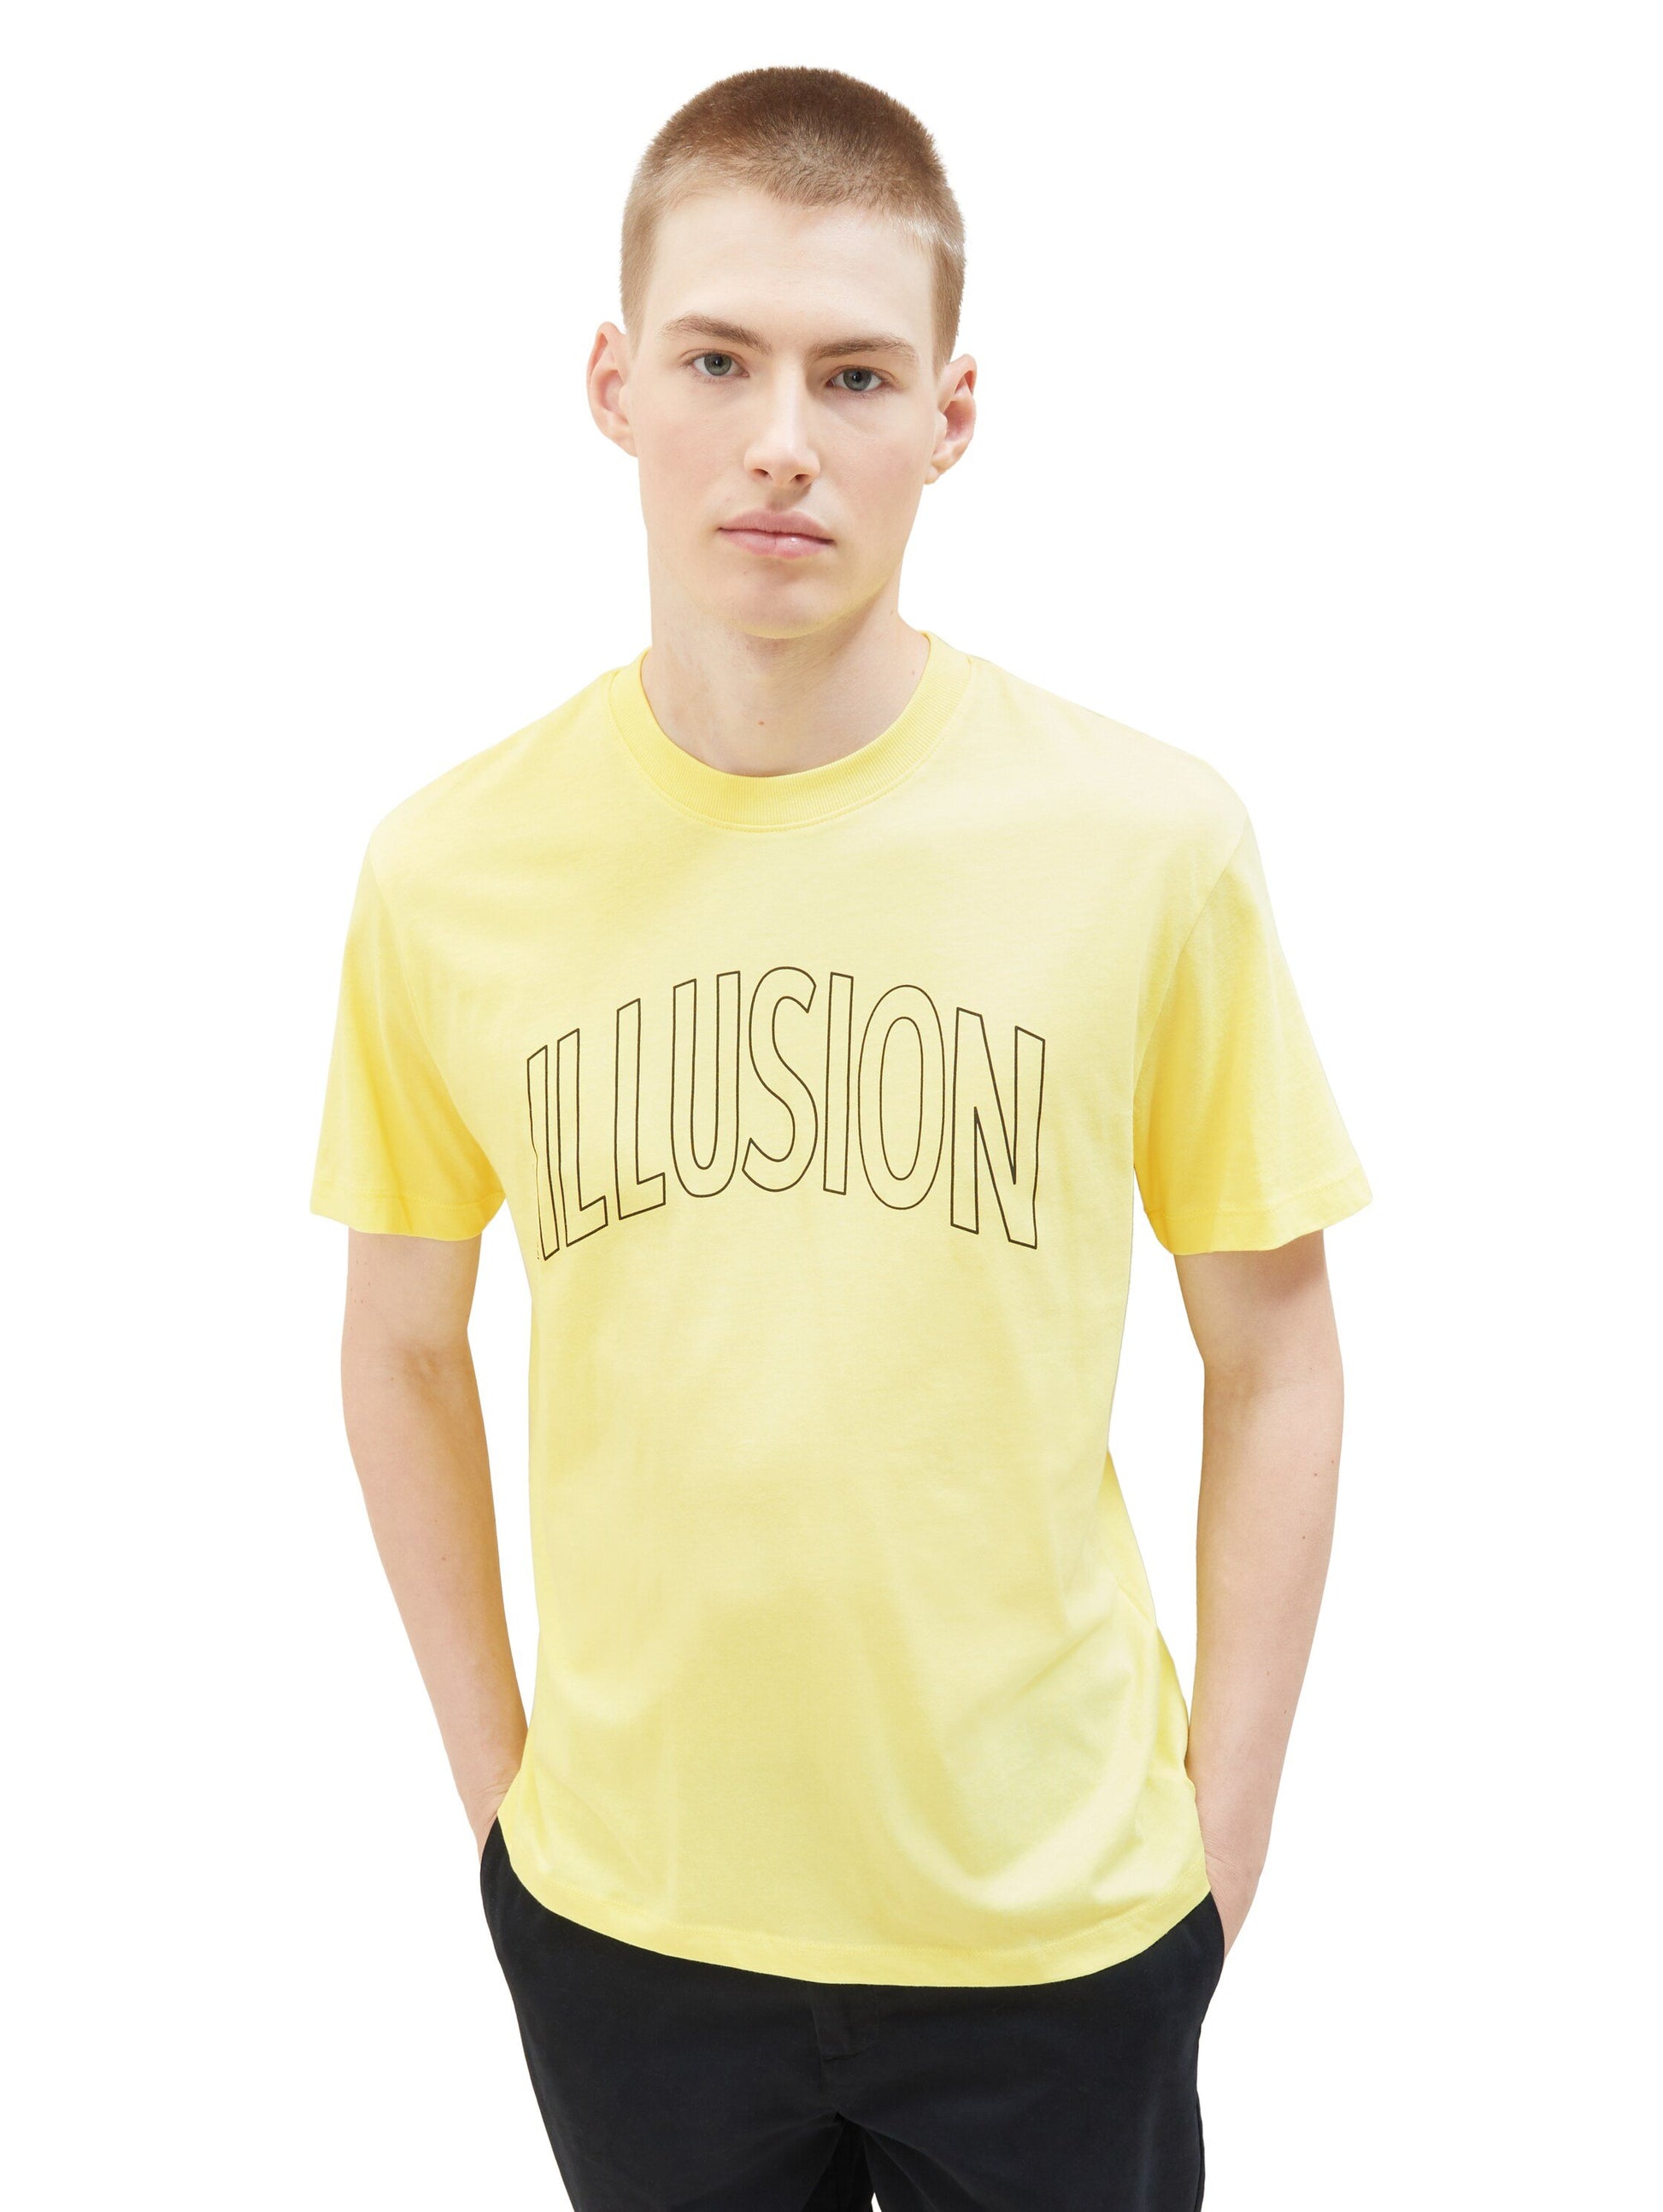 relaxed printed t-shirt (Canary Light)